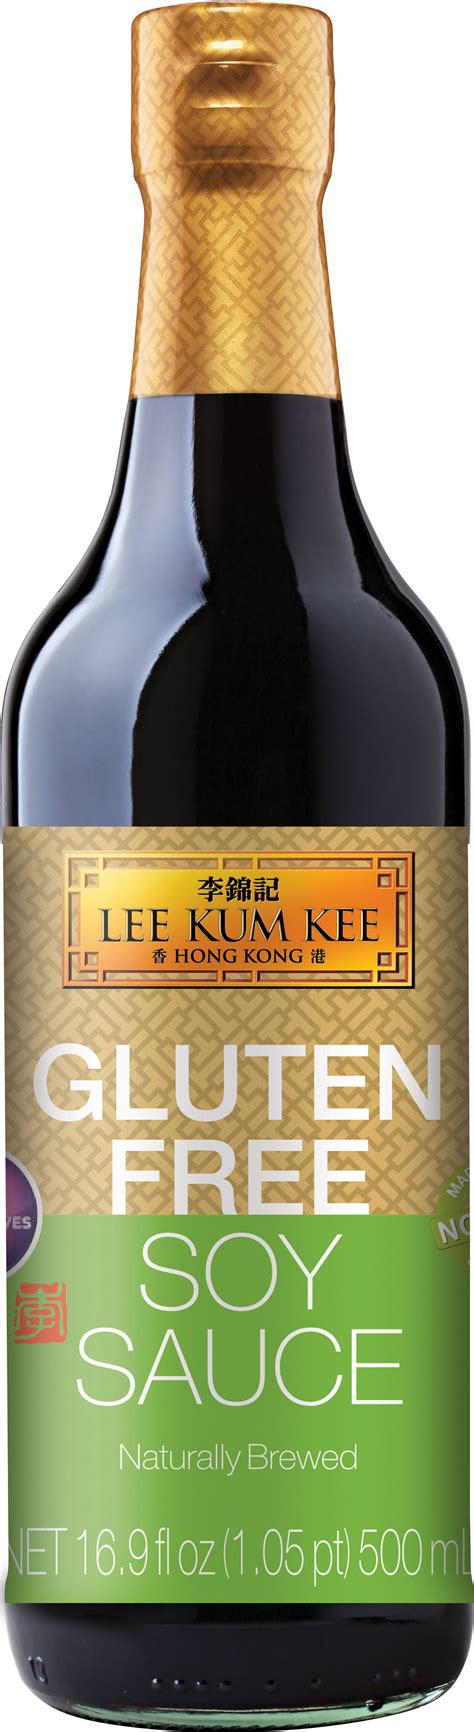 Gluten Free Soy Sauce Soy Sauce Lee Kum Kee Home Usa